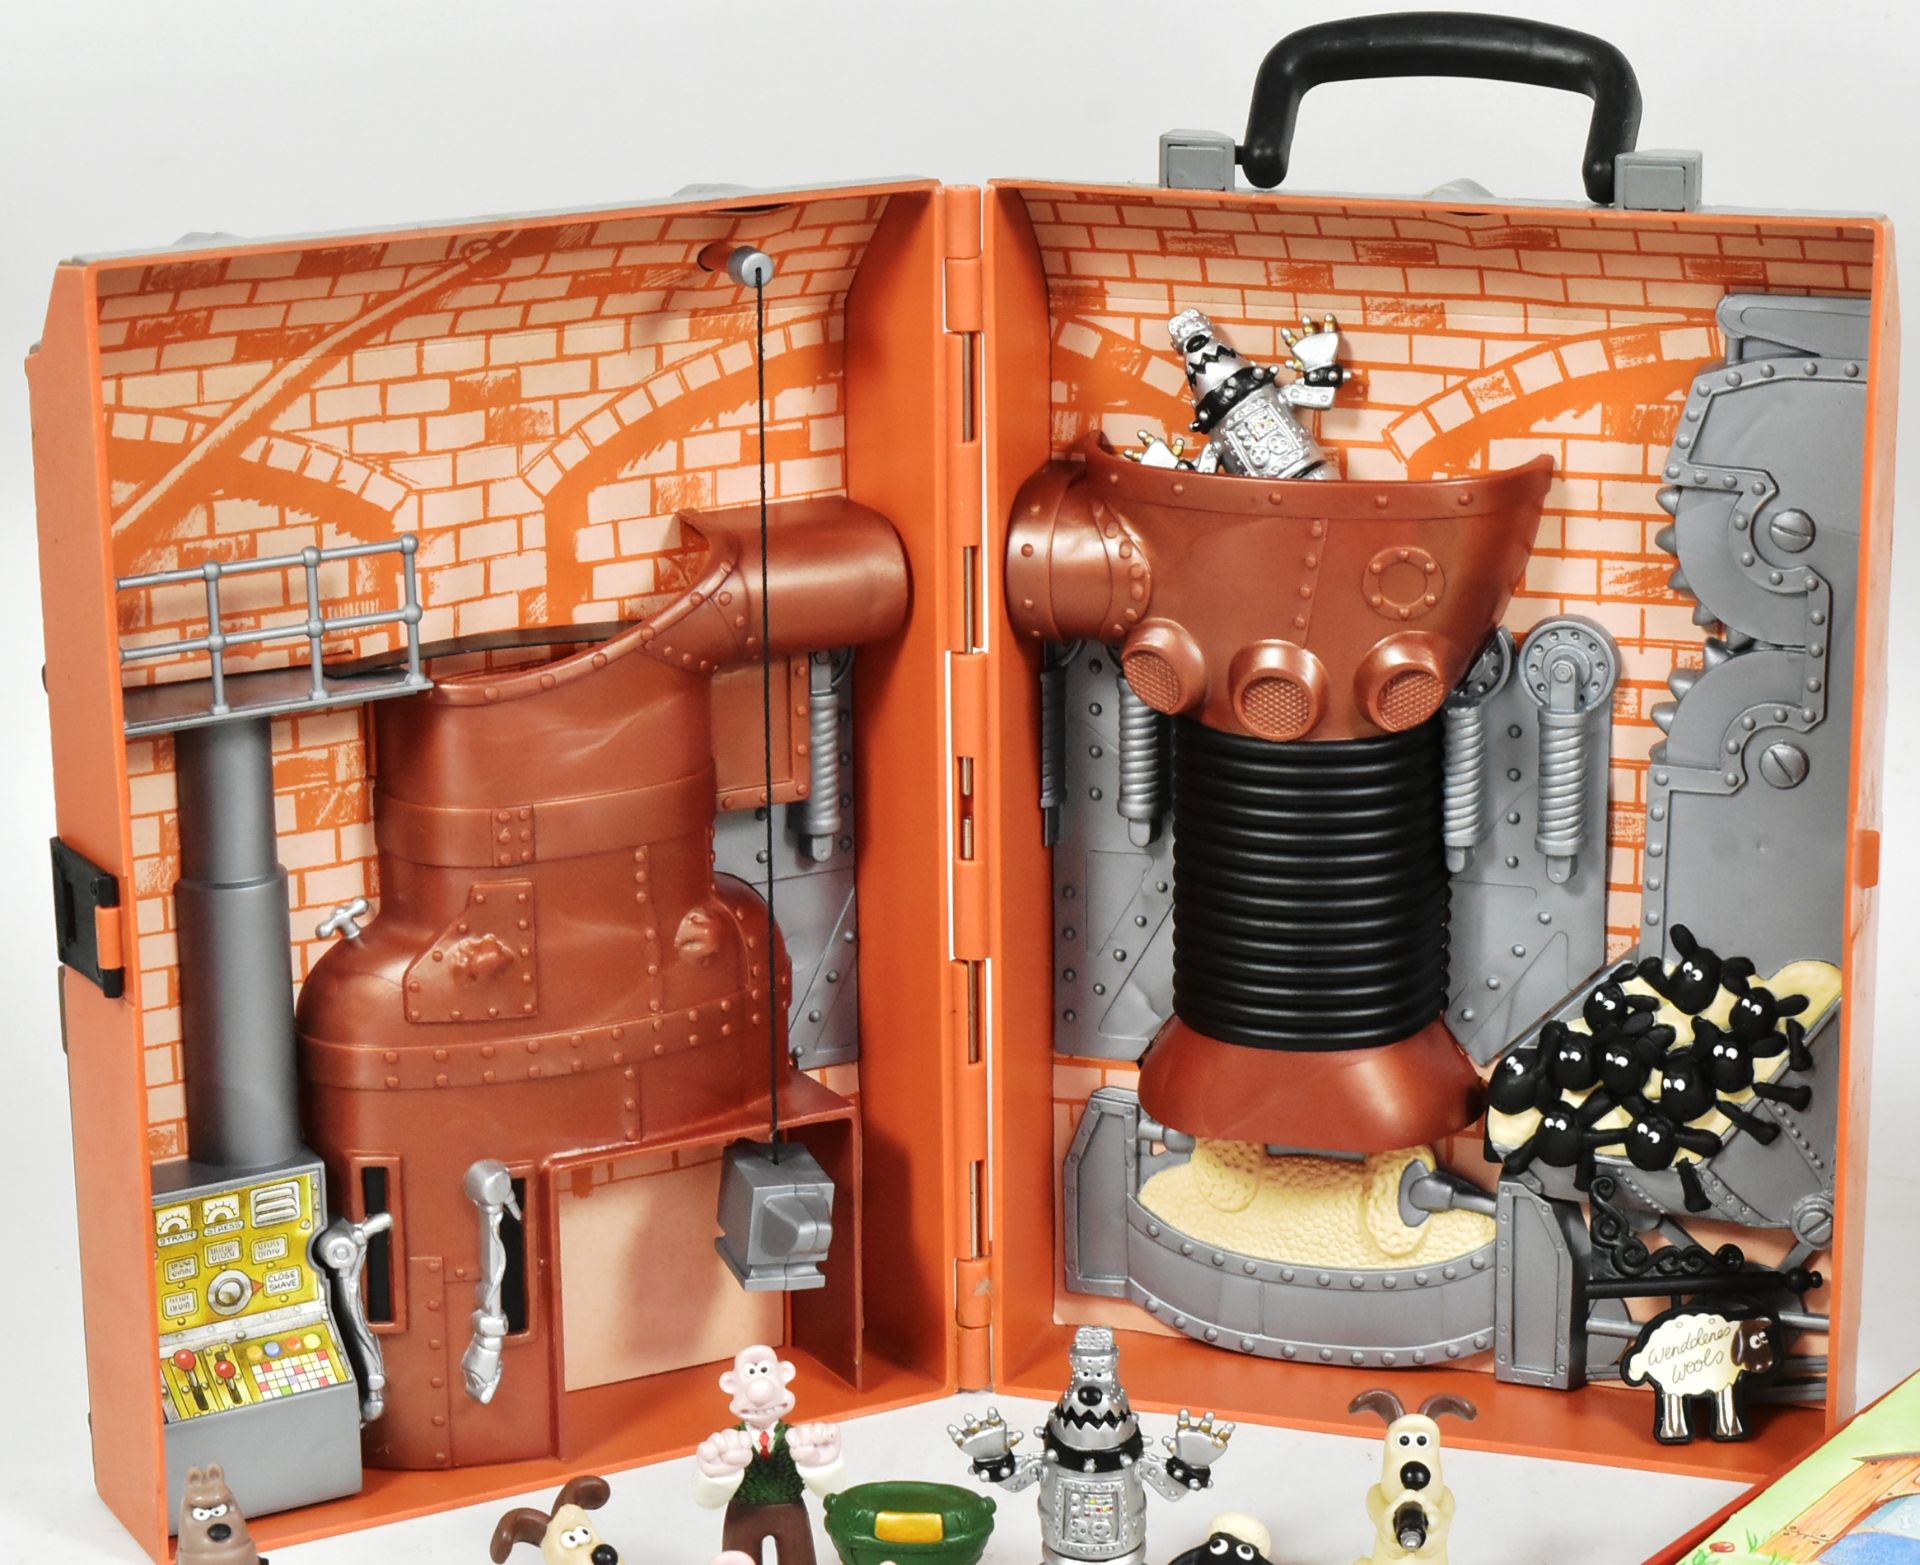 WALLACE & GROMIT - VINTAGE CARRY CASE PLAYSETS - Image 3 of 6